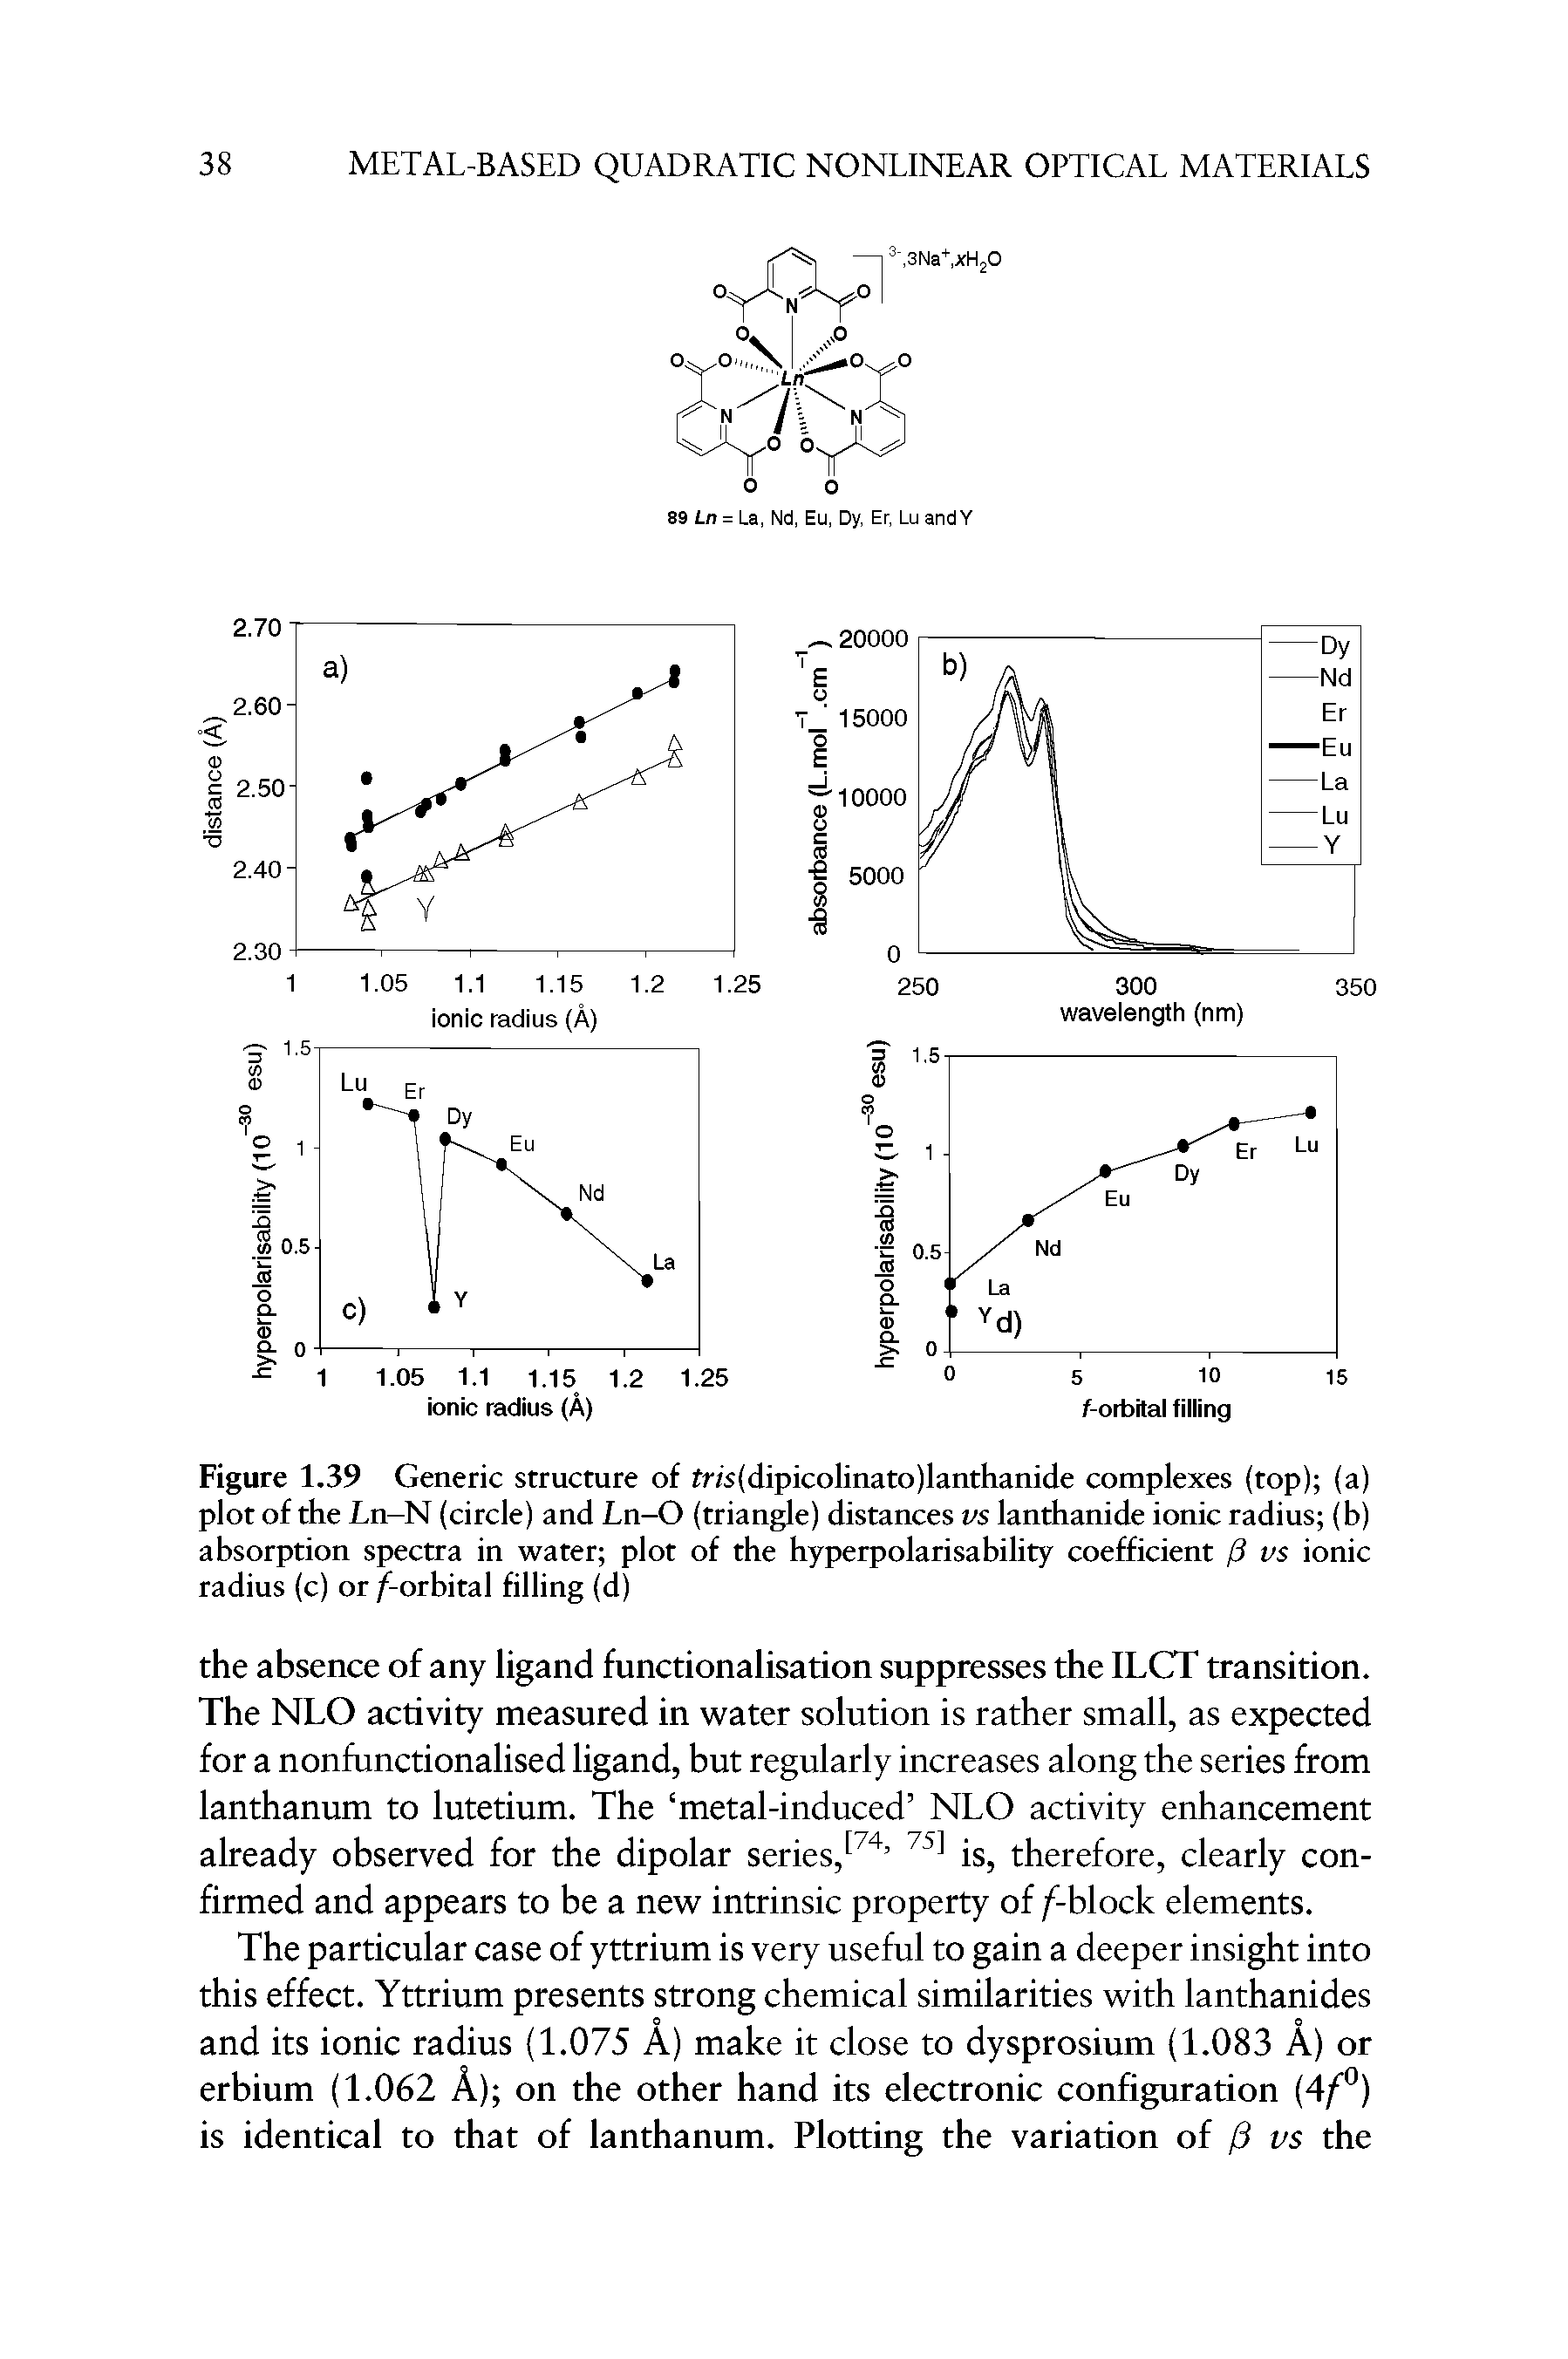 Figure 1.39 Generic structure of tf (dipicolinato)lanthanide complexes (top) (a) plot of the Ln-N (circle) and Ln-O (triangle) distances vs lanthanide ionic radius (h) absorption spectra in water plot of the hyperpolarisability coefficient /3 vs ionic radius (c) or /-orbital filling (d)...